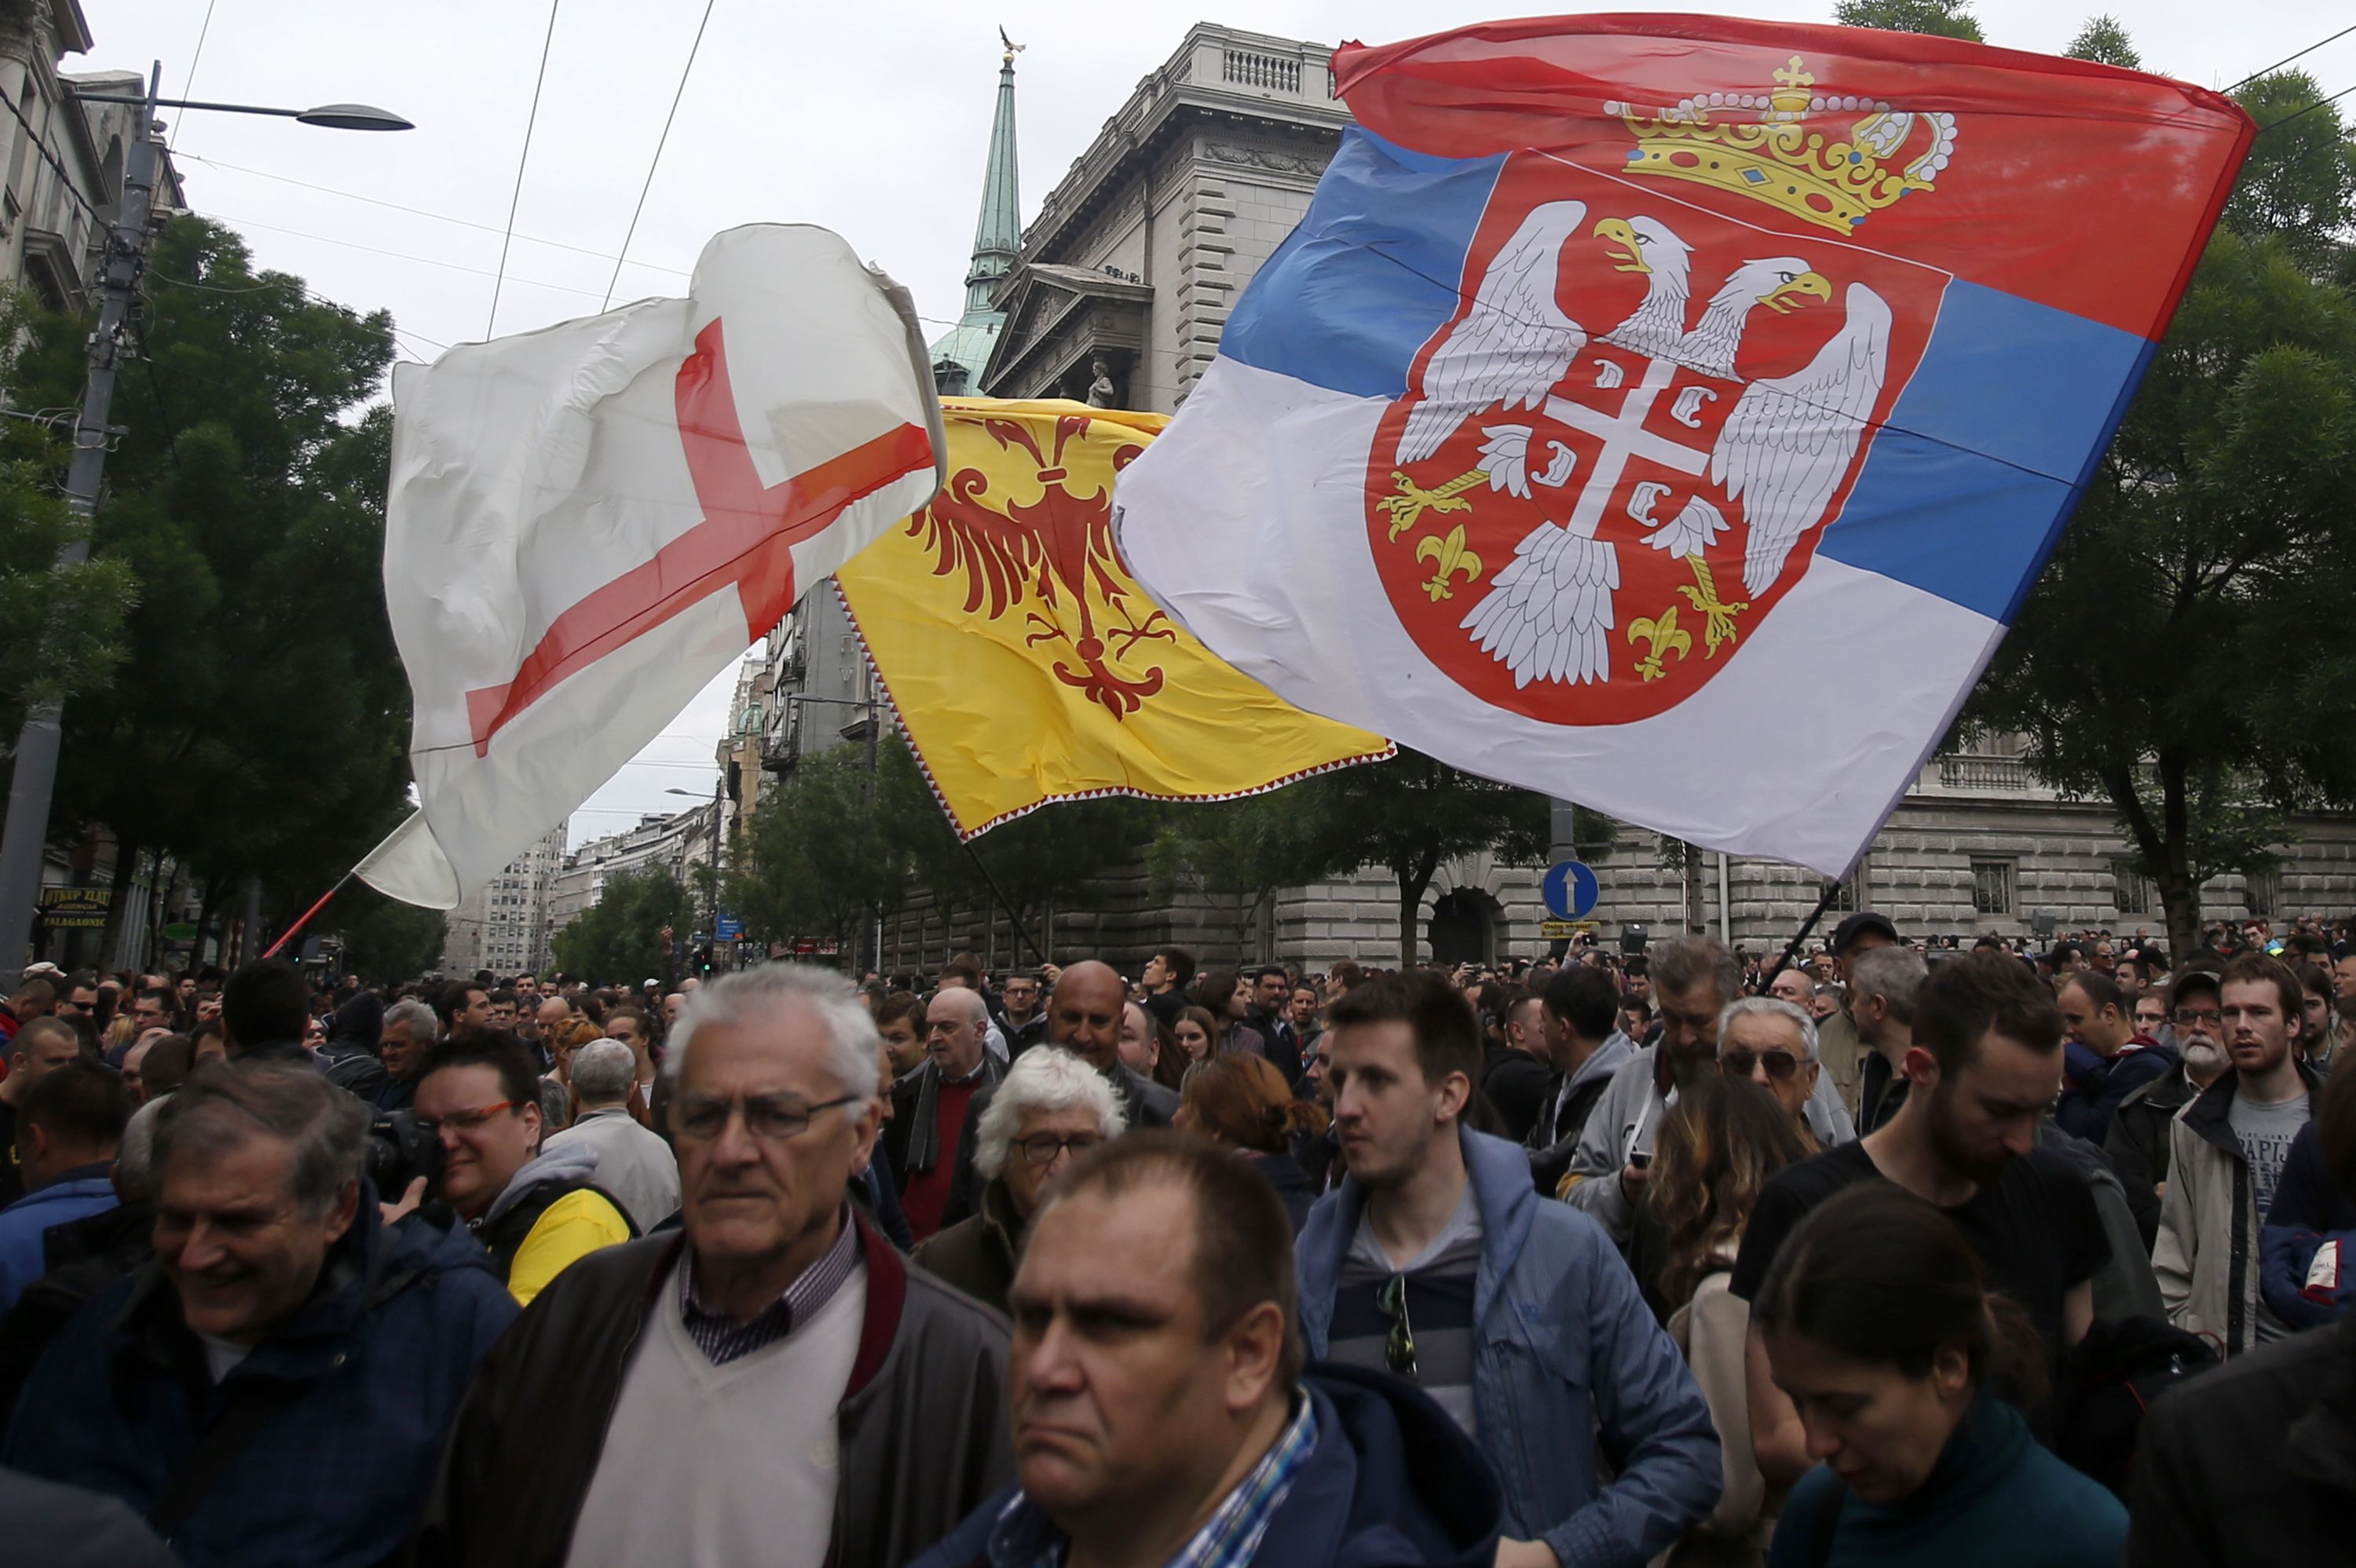 Opposition supporters wave flags during an opposition protest in Belgrade, Serbia